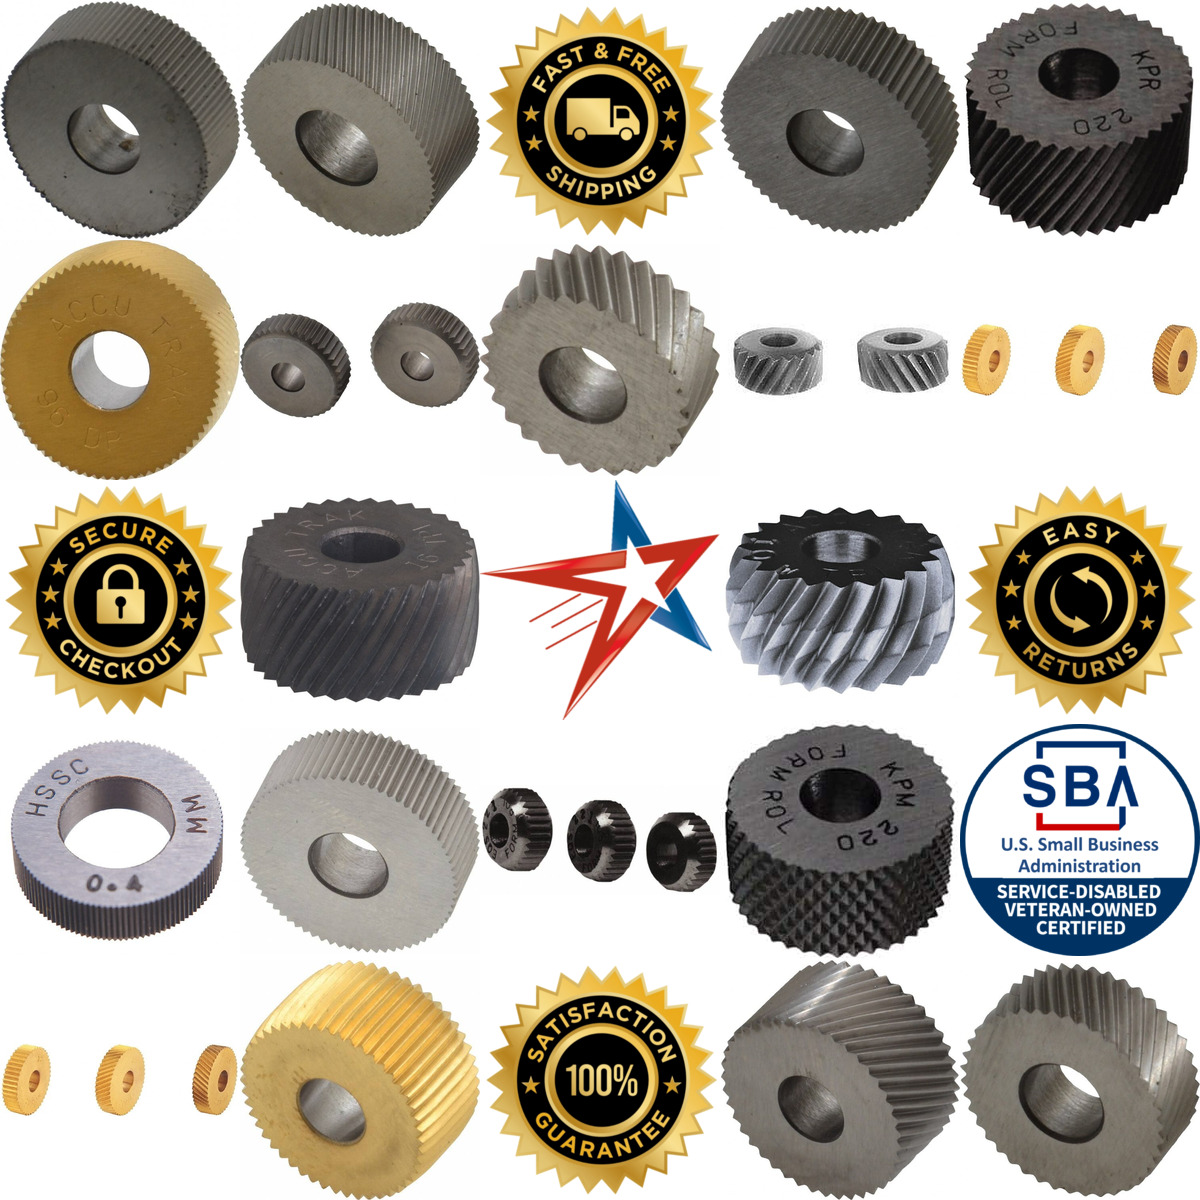 A selection of Knurl Wheels and Knurl Wheel Sets products on GoVets